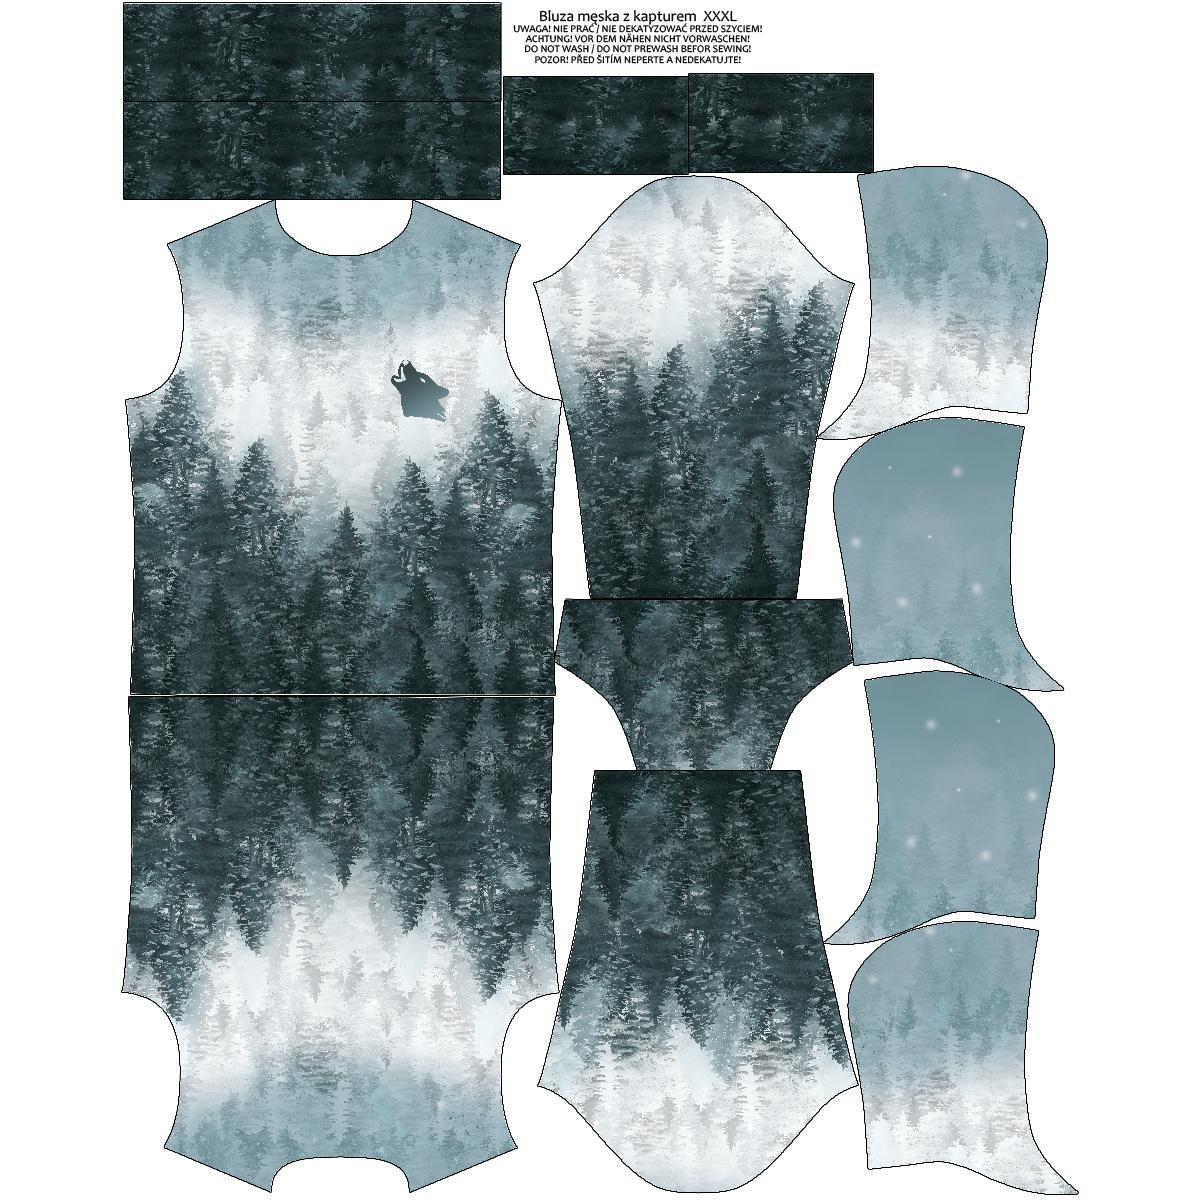 MEN’S HOODIE (COLORADO) - FORREST OMBRE (WINTER IN THE MOUNTAIN) - sewing set